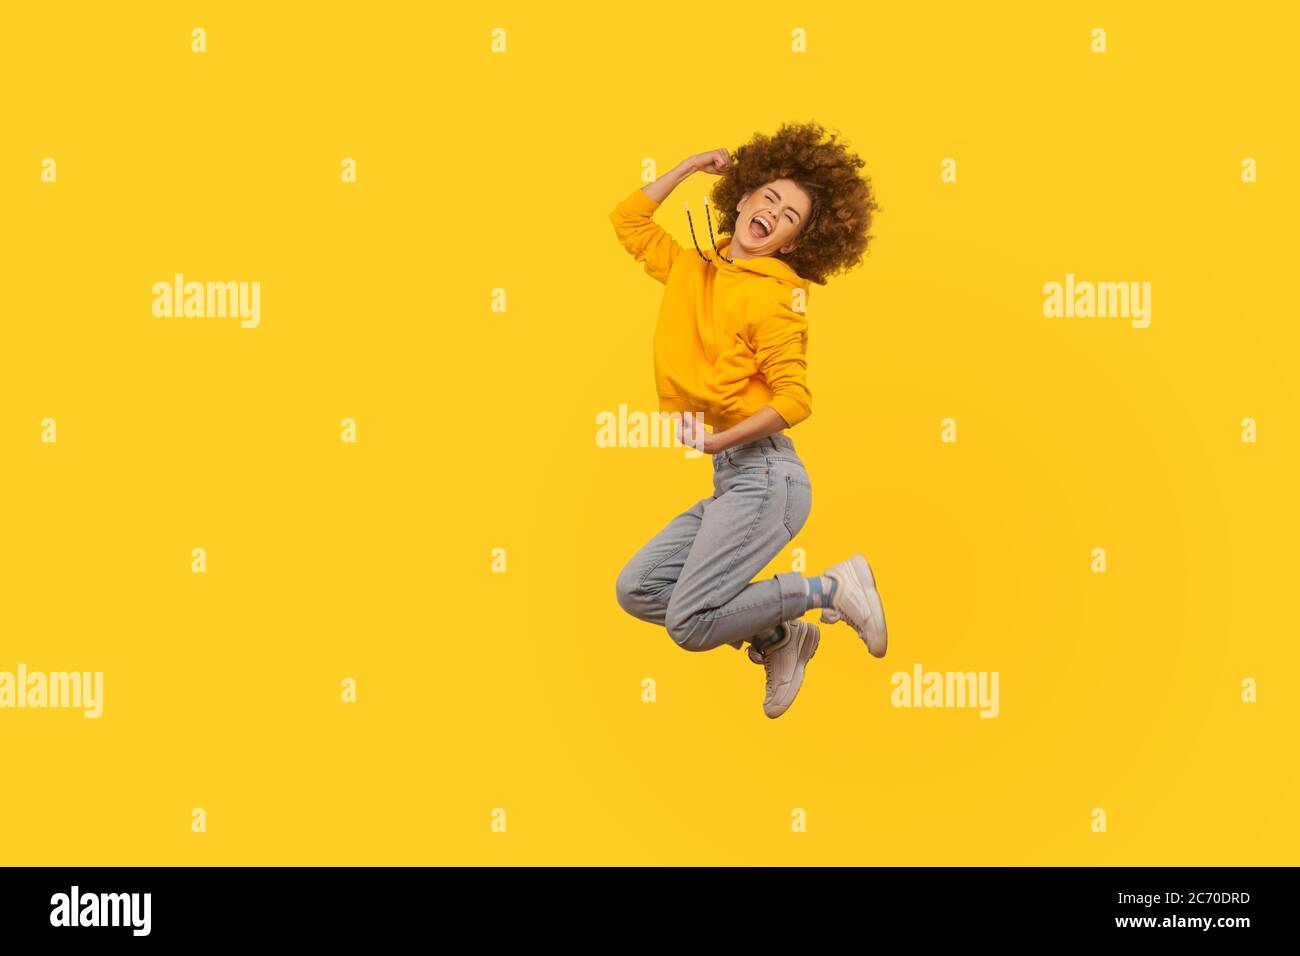 Portrait of overjoyed enthusiastic curly-haired girl in urban style hoodie and jeans jumping high in air, flying and shouting from happiness, rejoicin Stock Photo